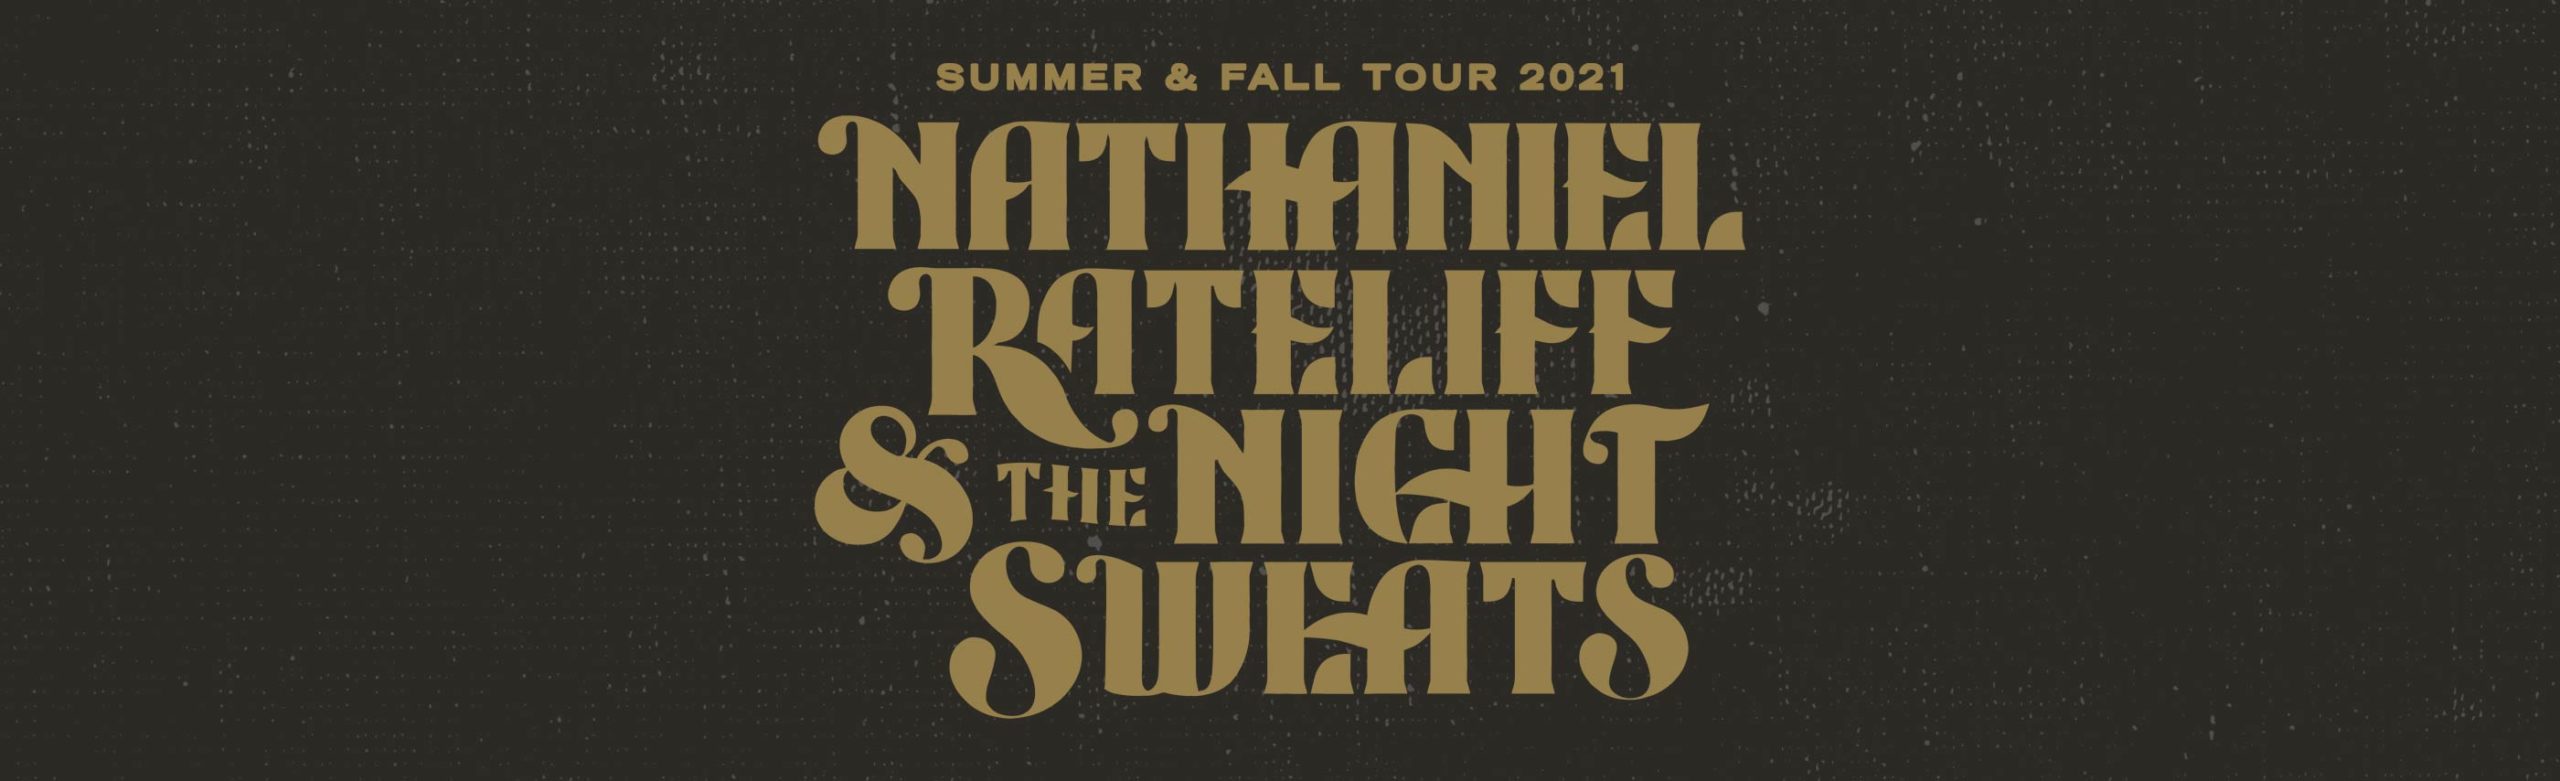 Event Info: Nathaniel Rateliff & The Night Sweats at KettleHouse Amphitheater 2021 Image